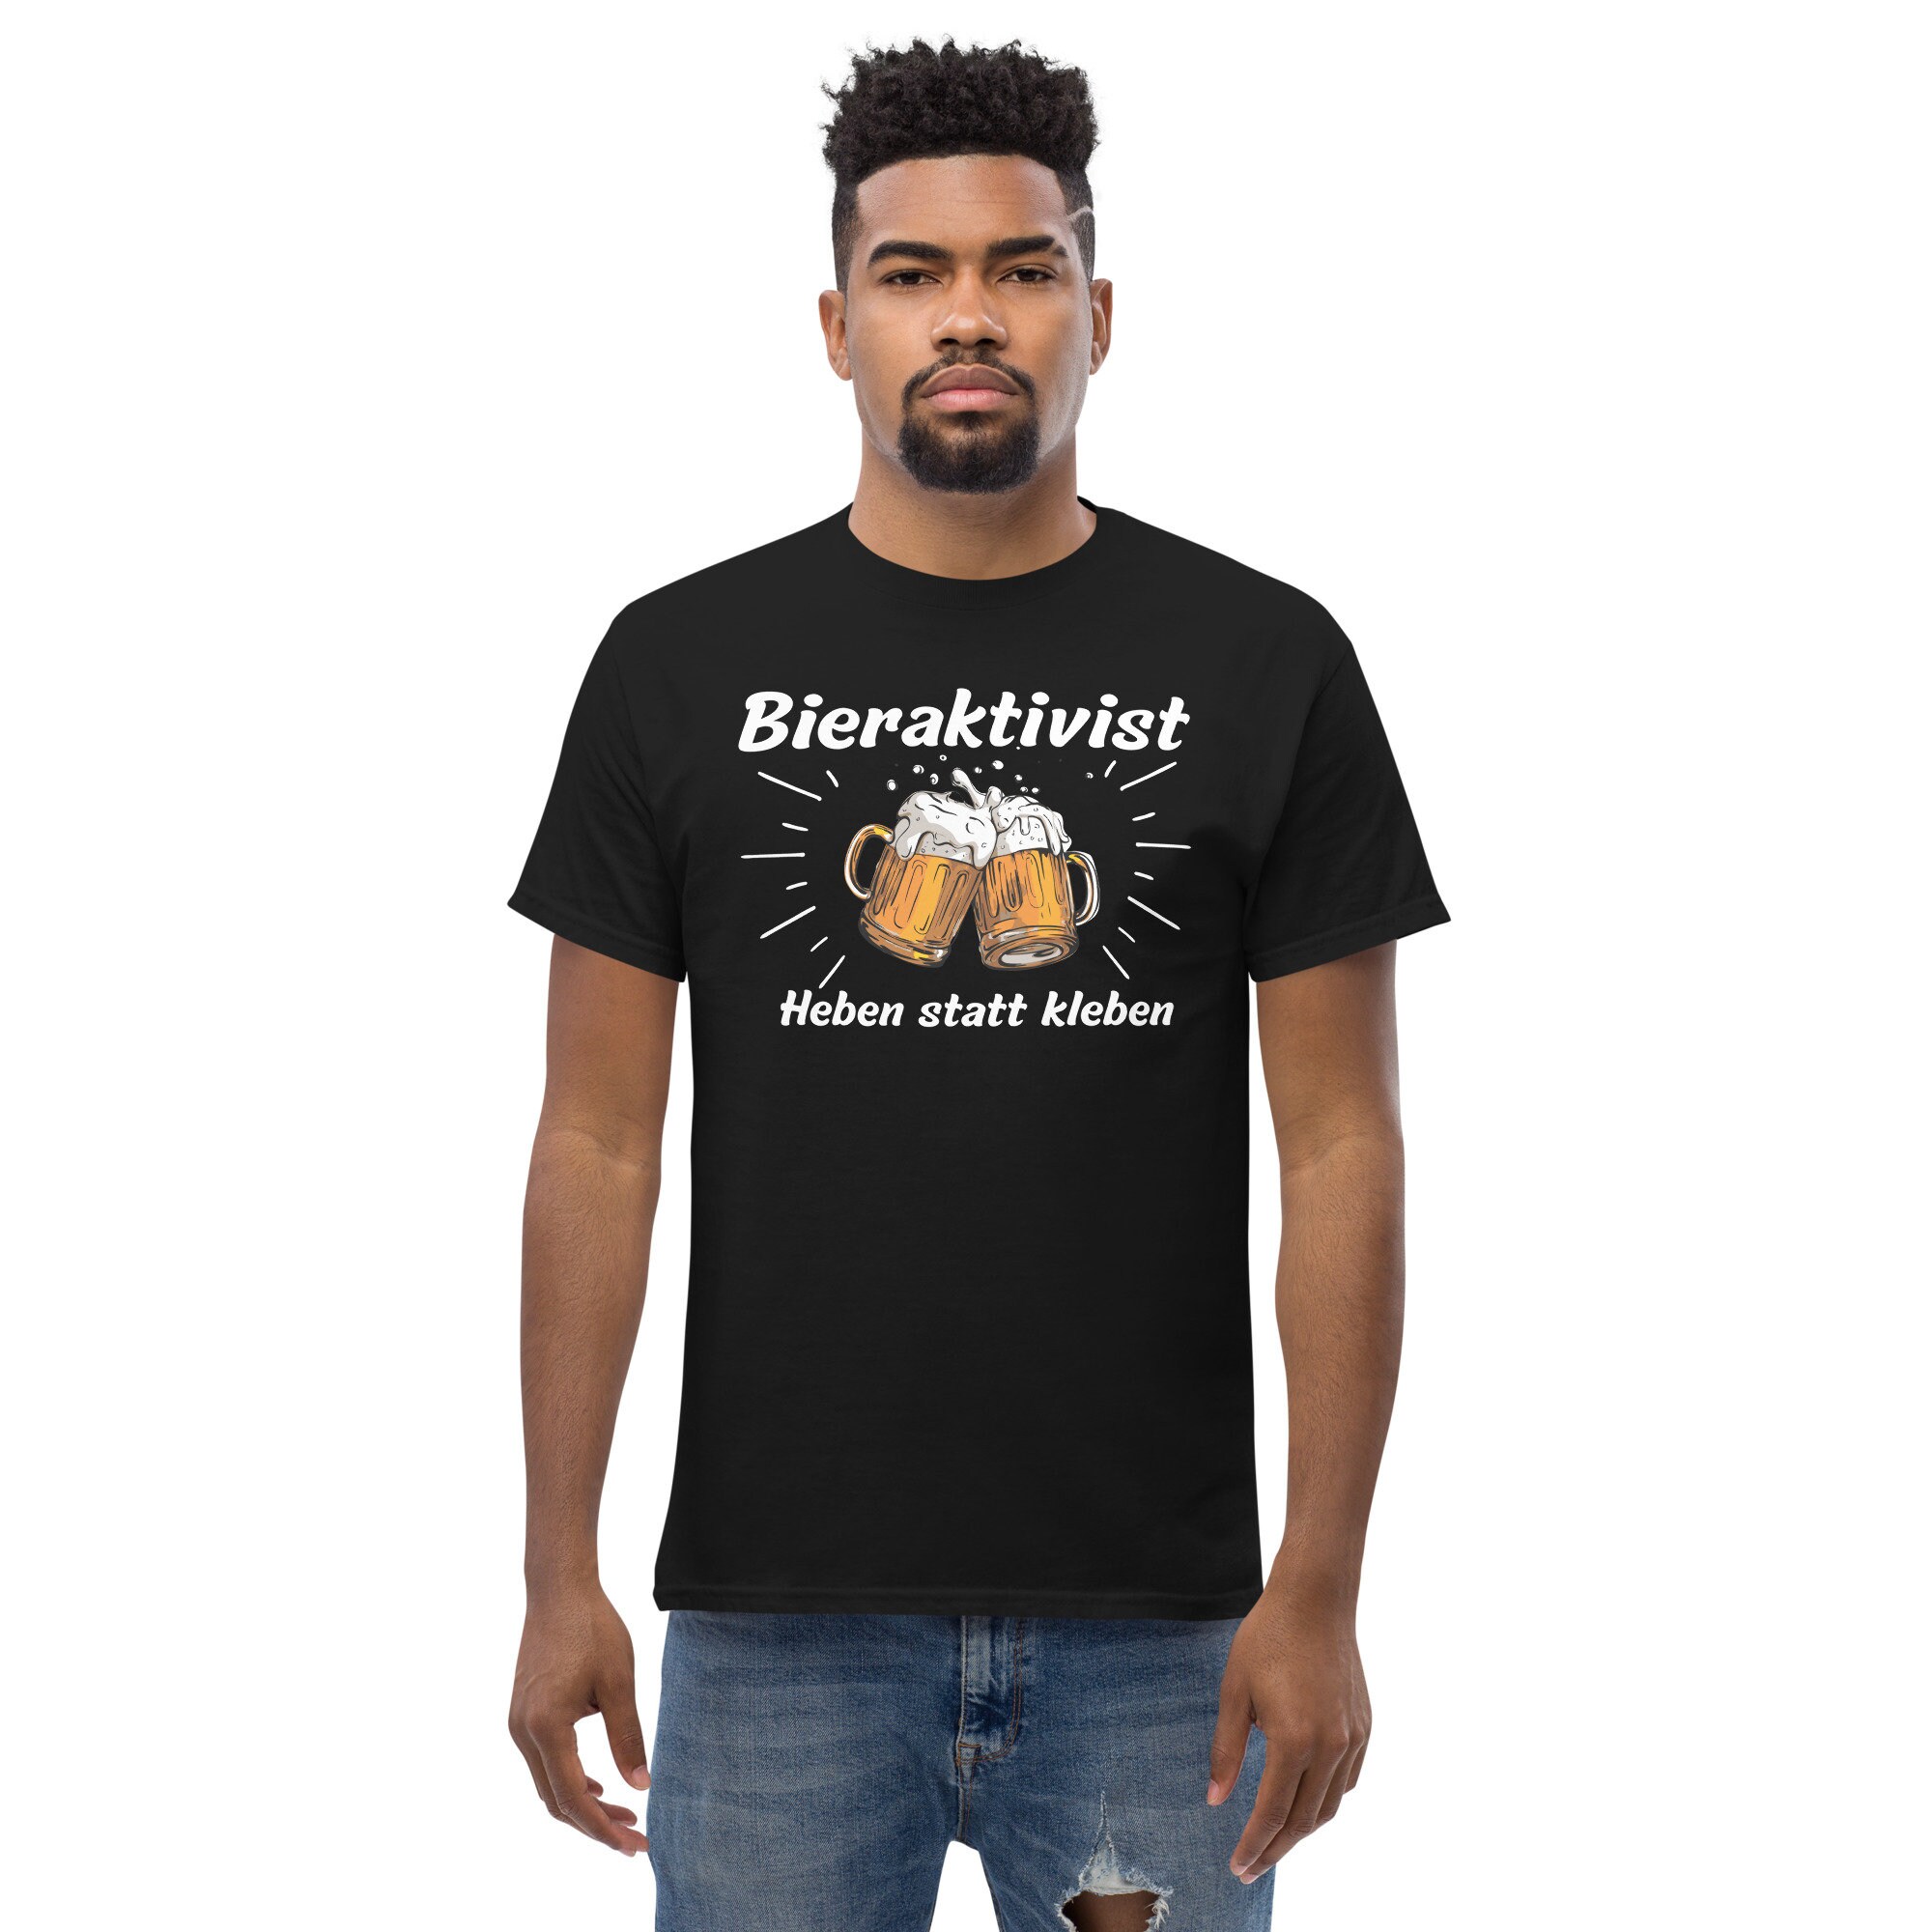 Bieraktivist Heben Statt Kleben, Party Tshirt for Man and Woman, Beer  Alcohol Shirt With Funny Saying 